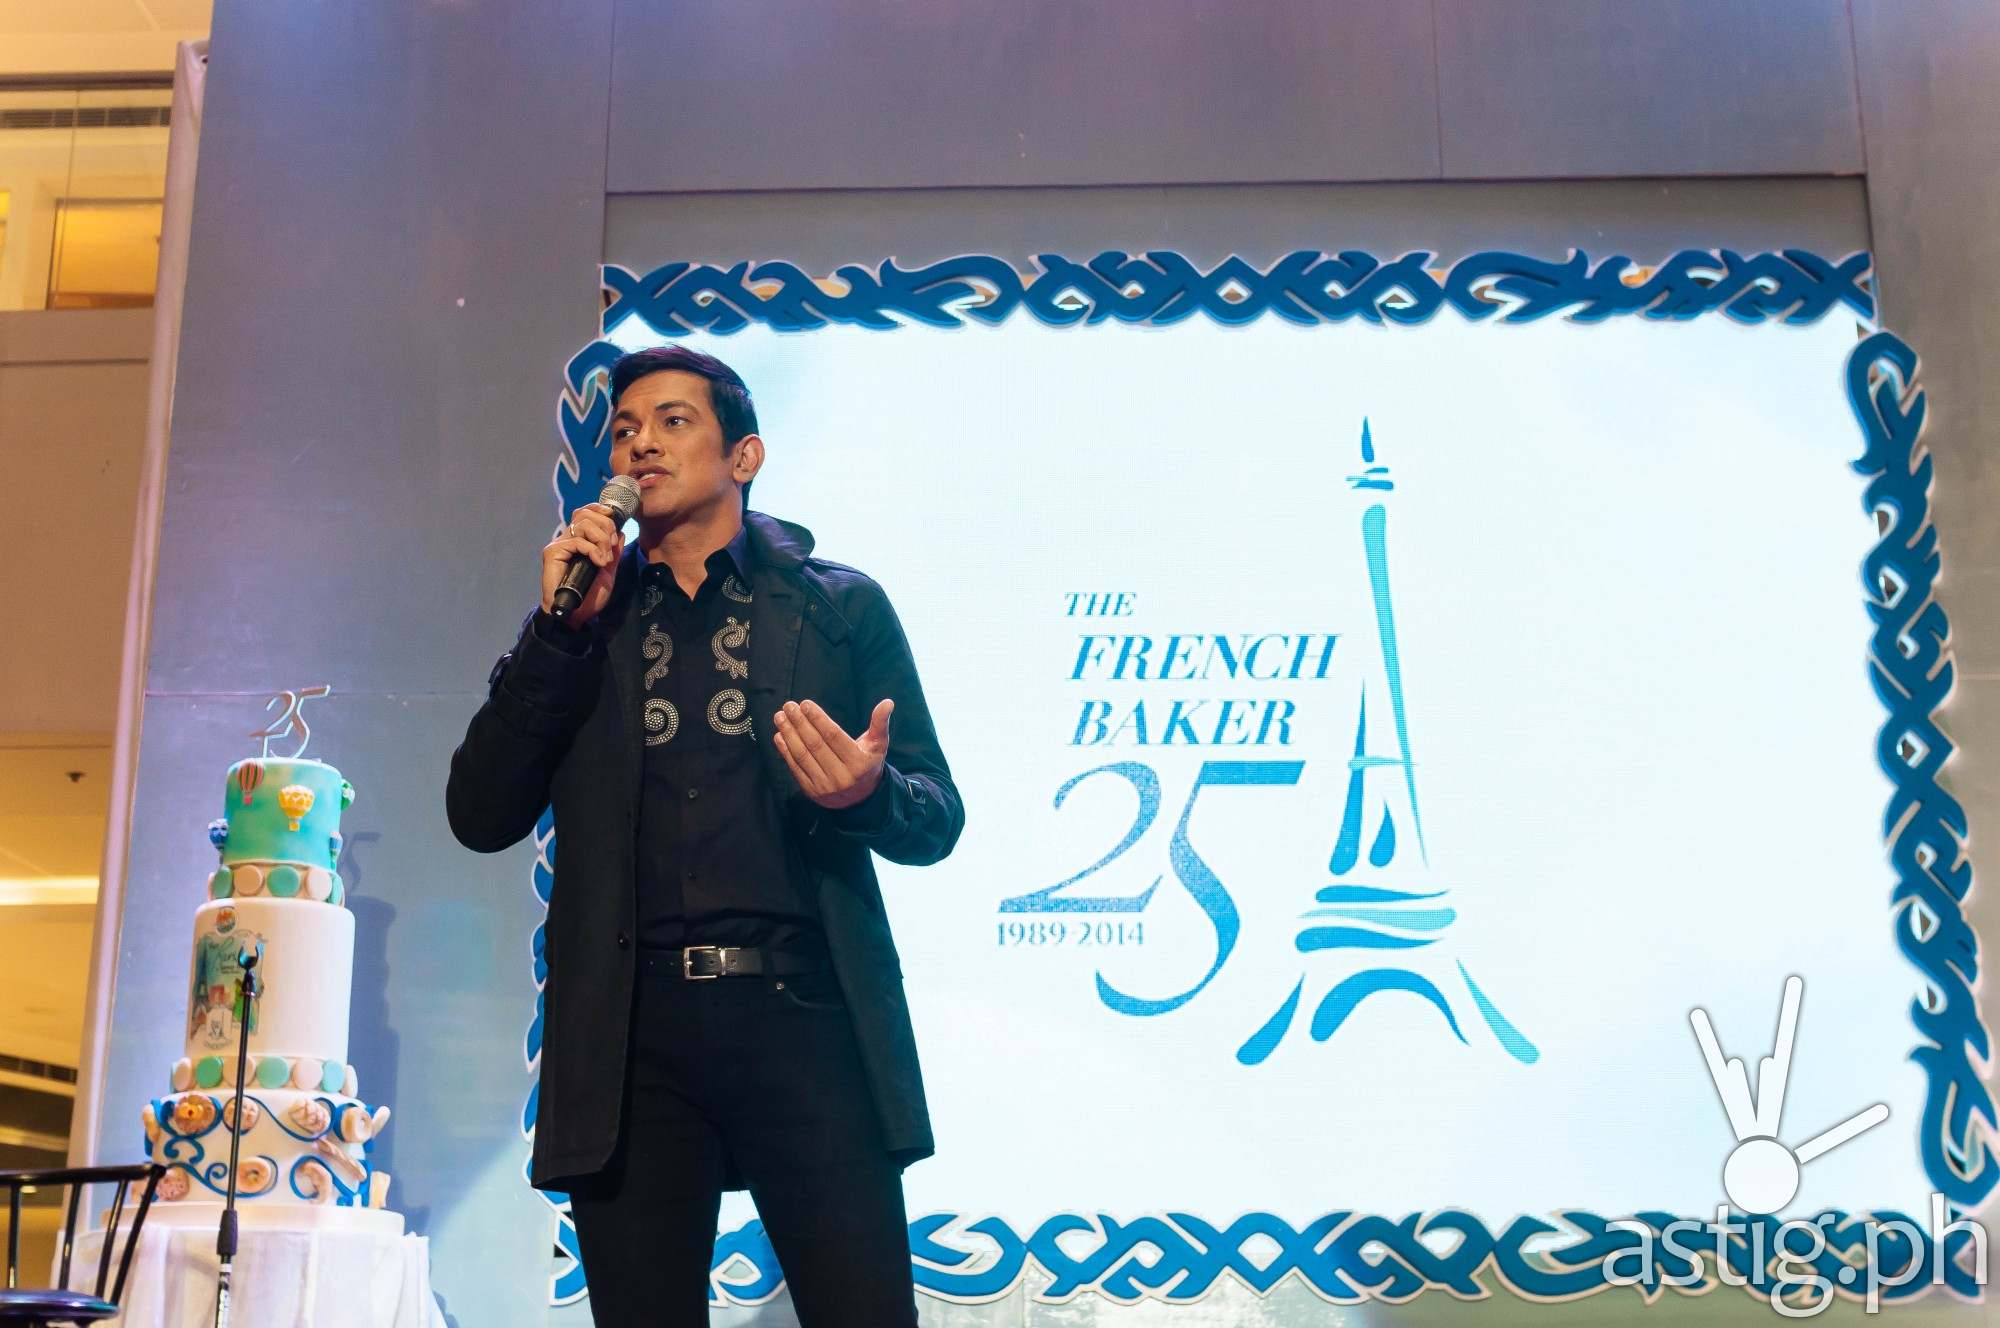 Gary Valenciano at the 25th Anniversary Celebration of The French Baker